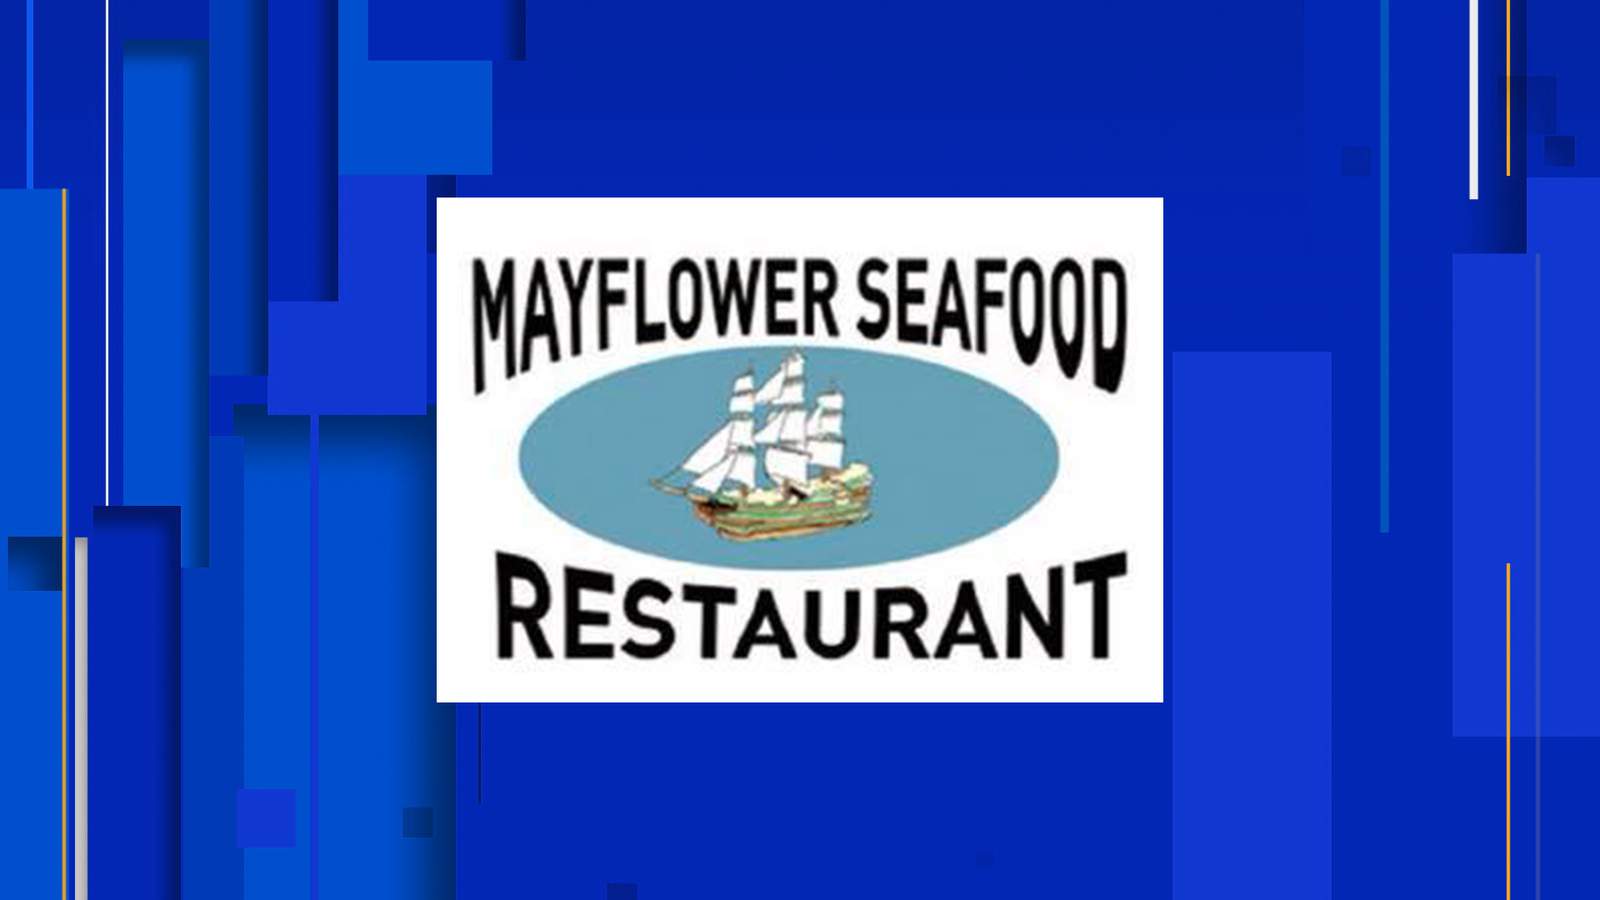 Danville seafood restaurant closes after 32 years